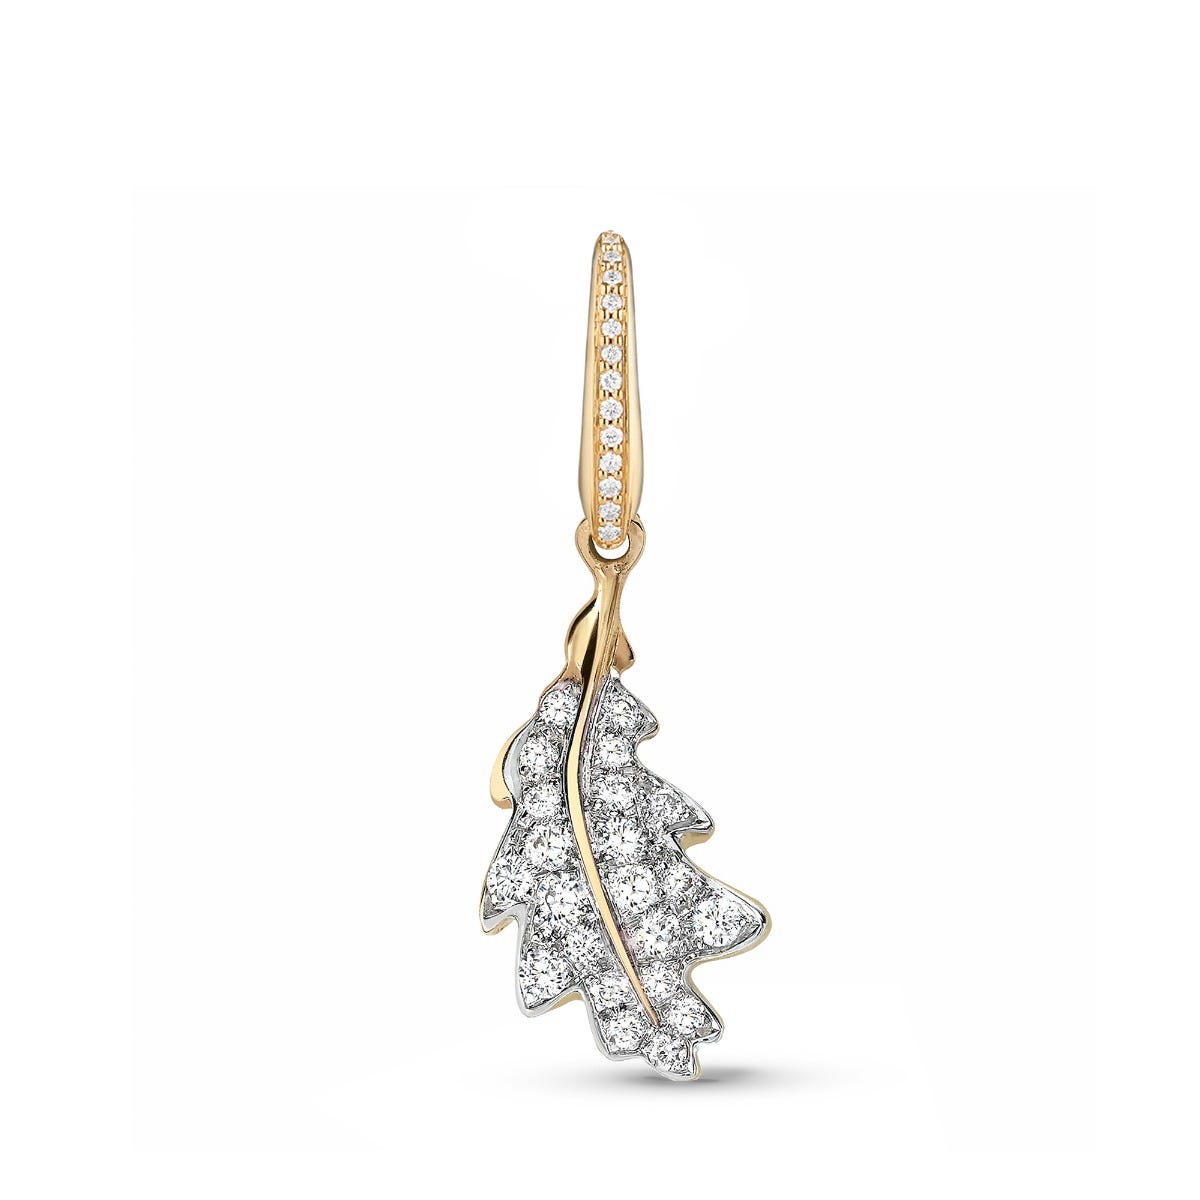 Woodland Oak Leaf Charm in 18ct Yellow Gold with Diamonds